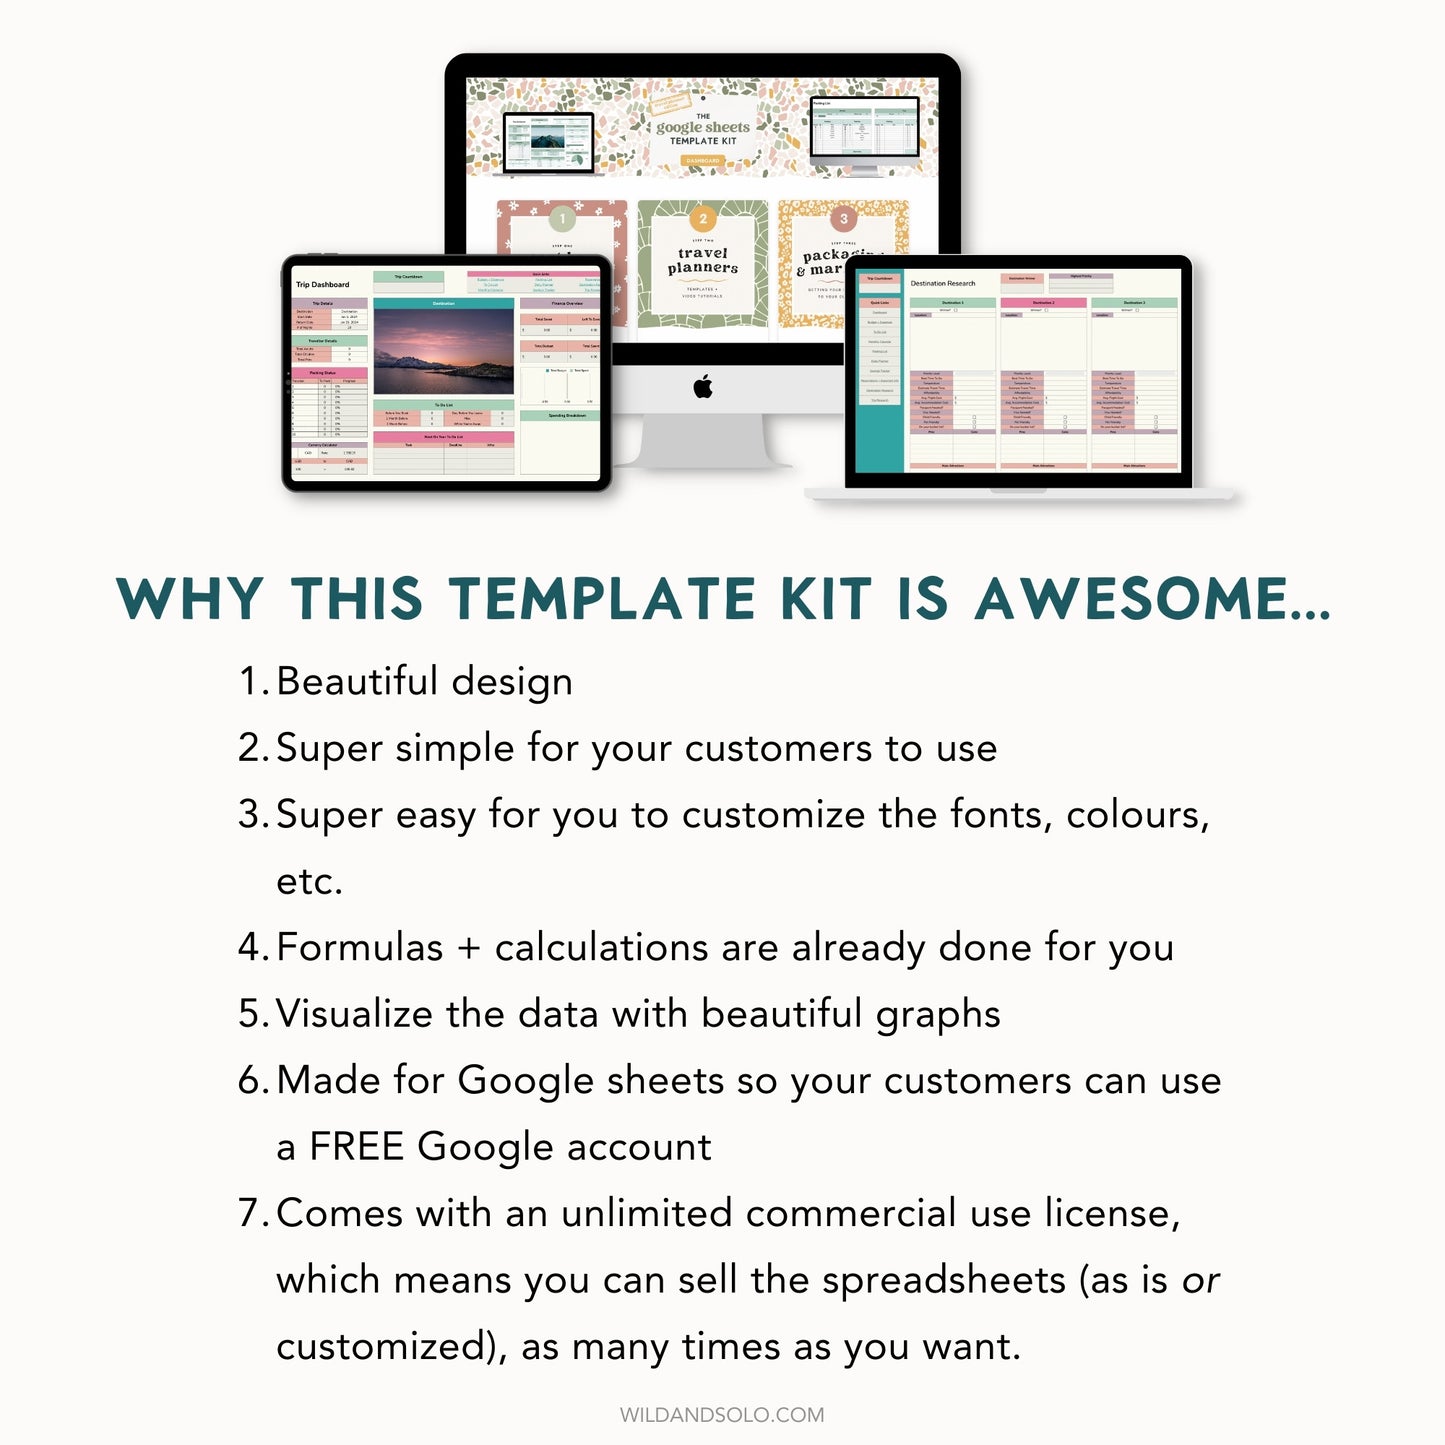 The Google Sheets Template Kit - Travel Planner Edition